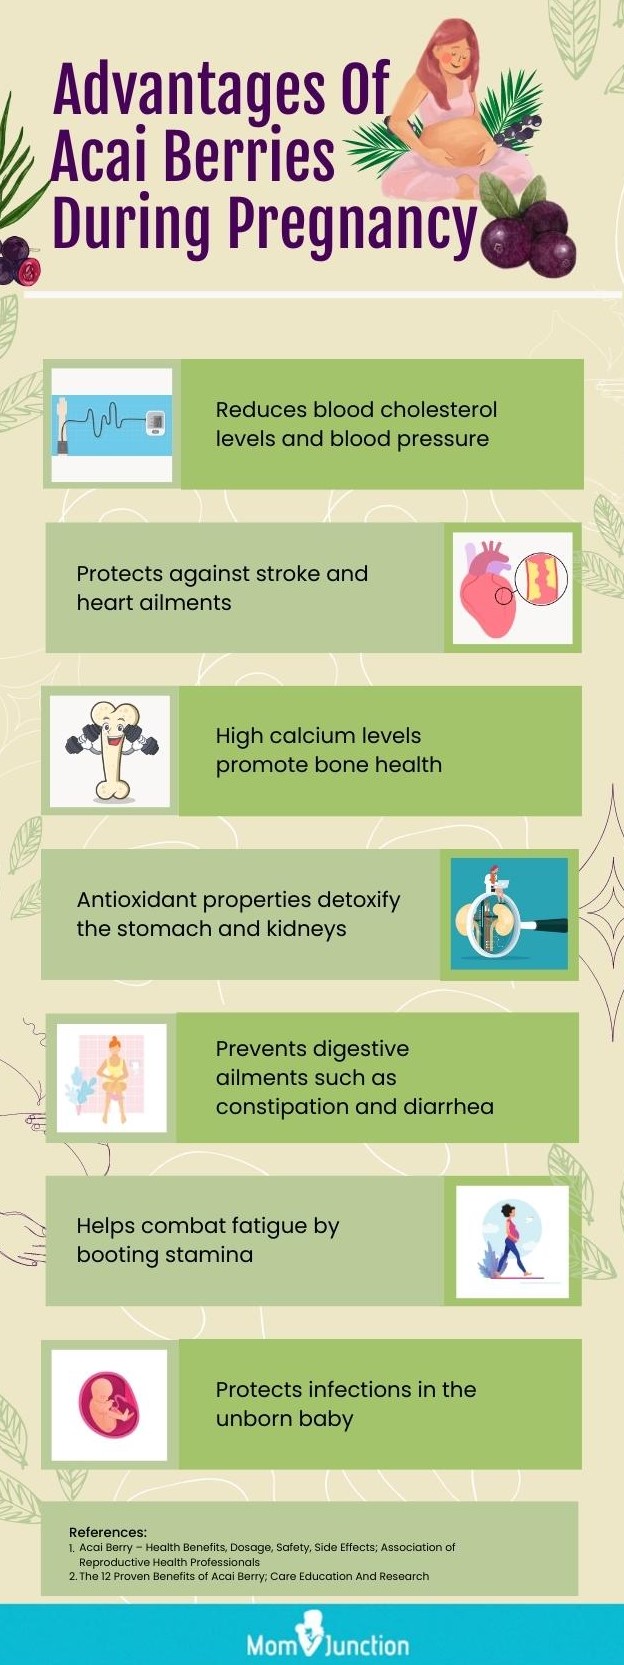 advantages of acai berries during pregnancy (infographic)